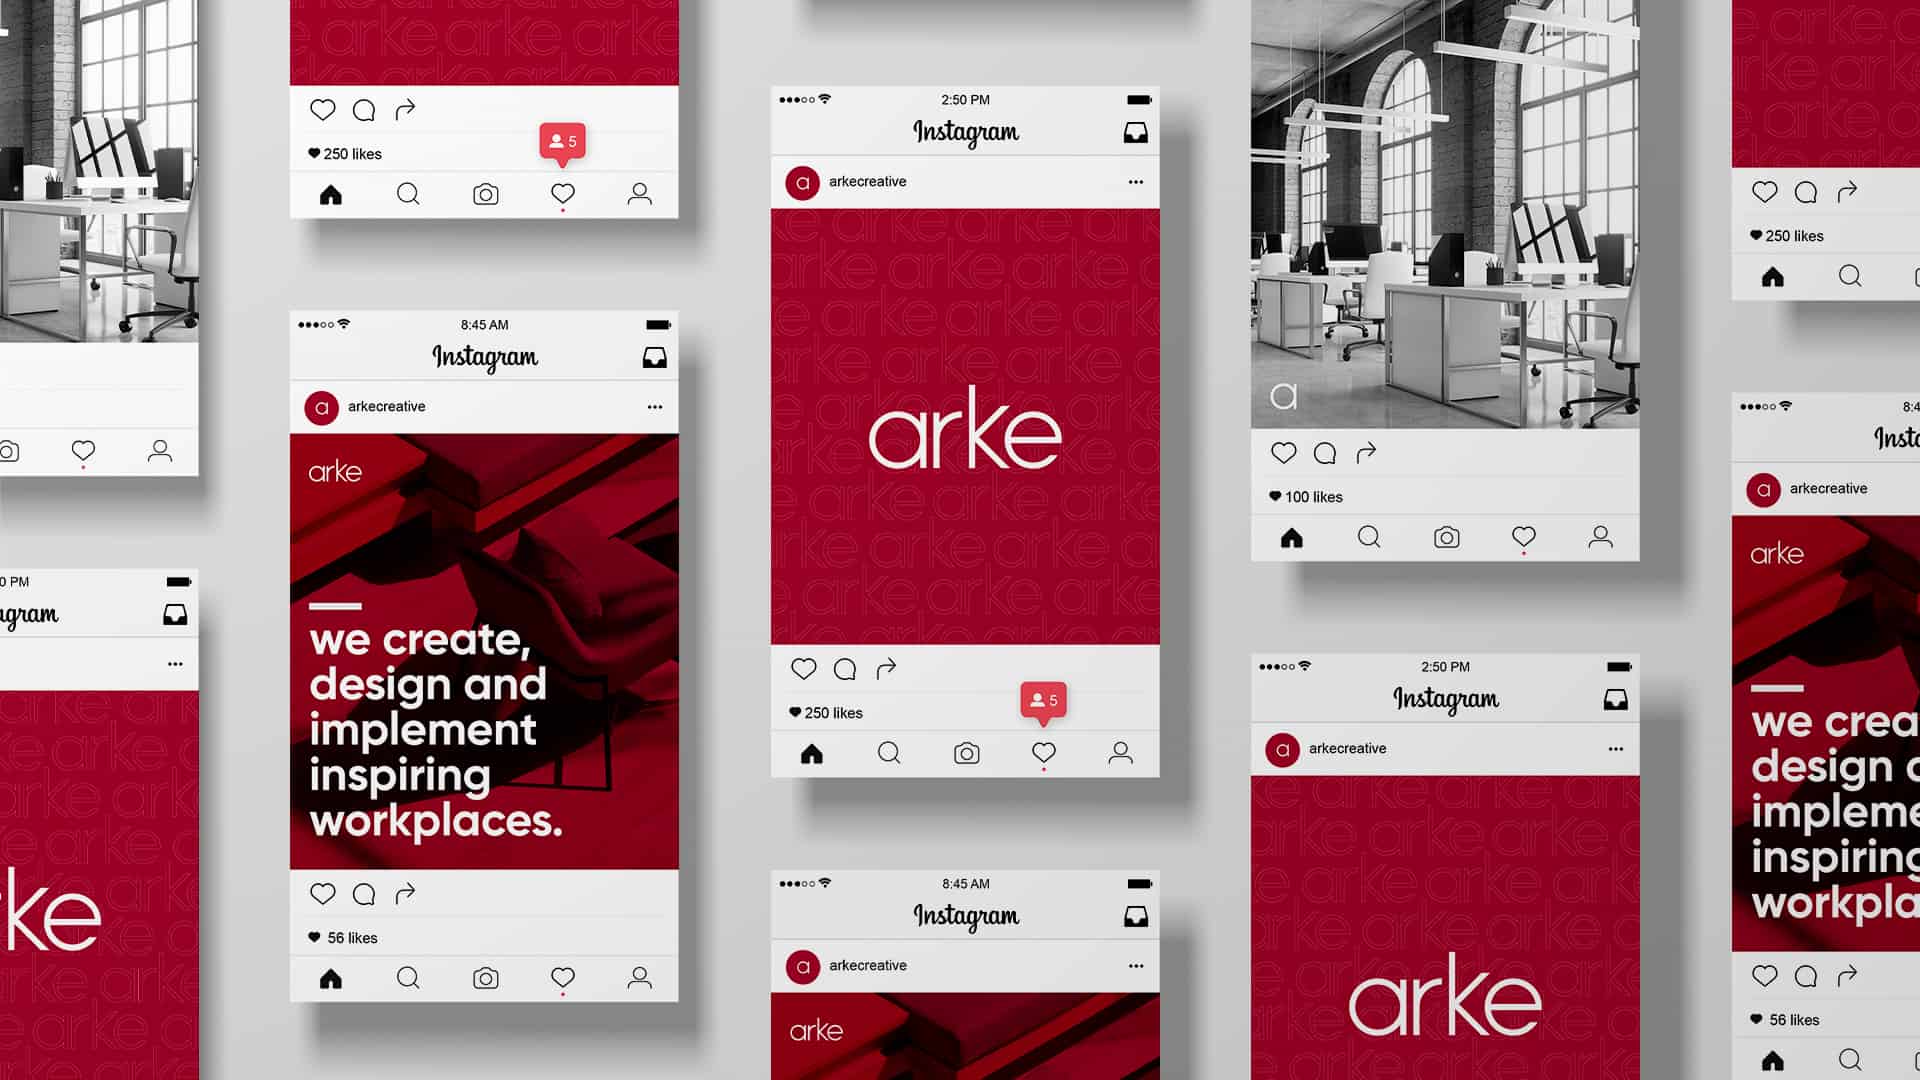 Social media posts created for Arke by marketing agency Swan Creative